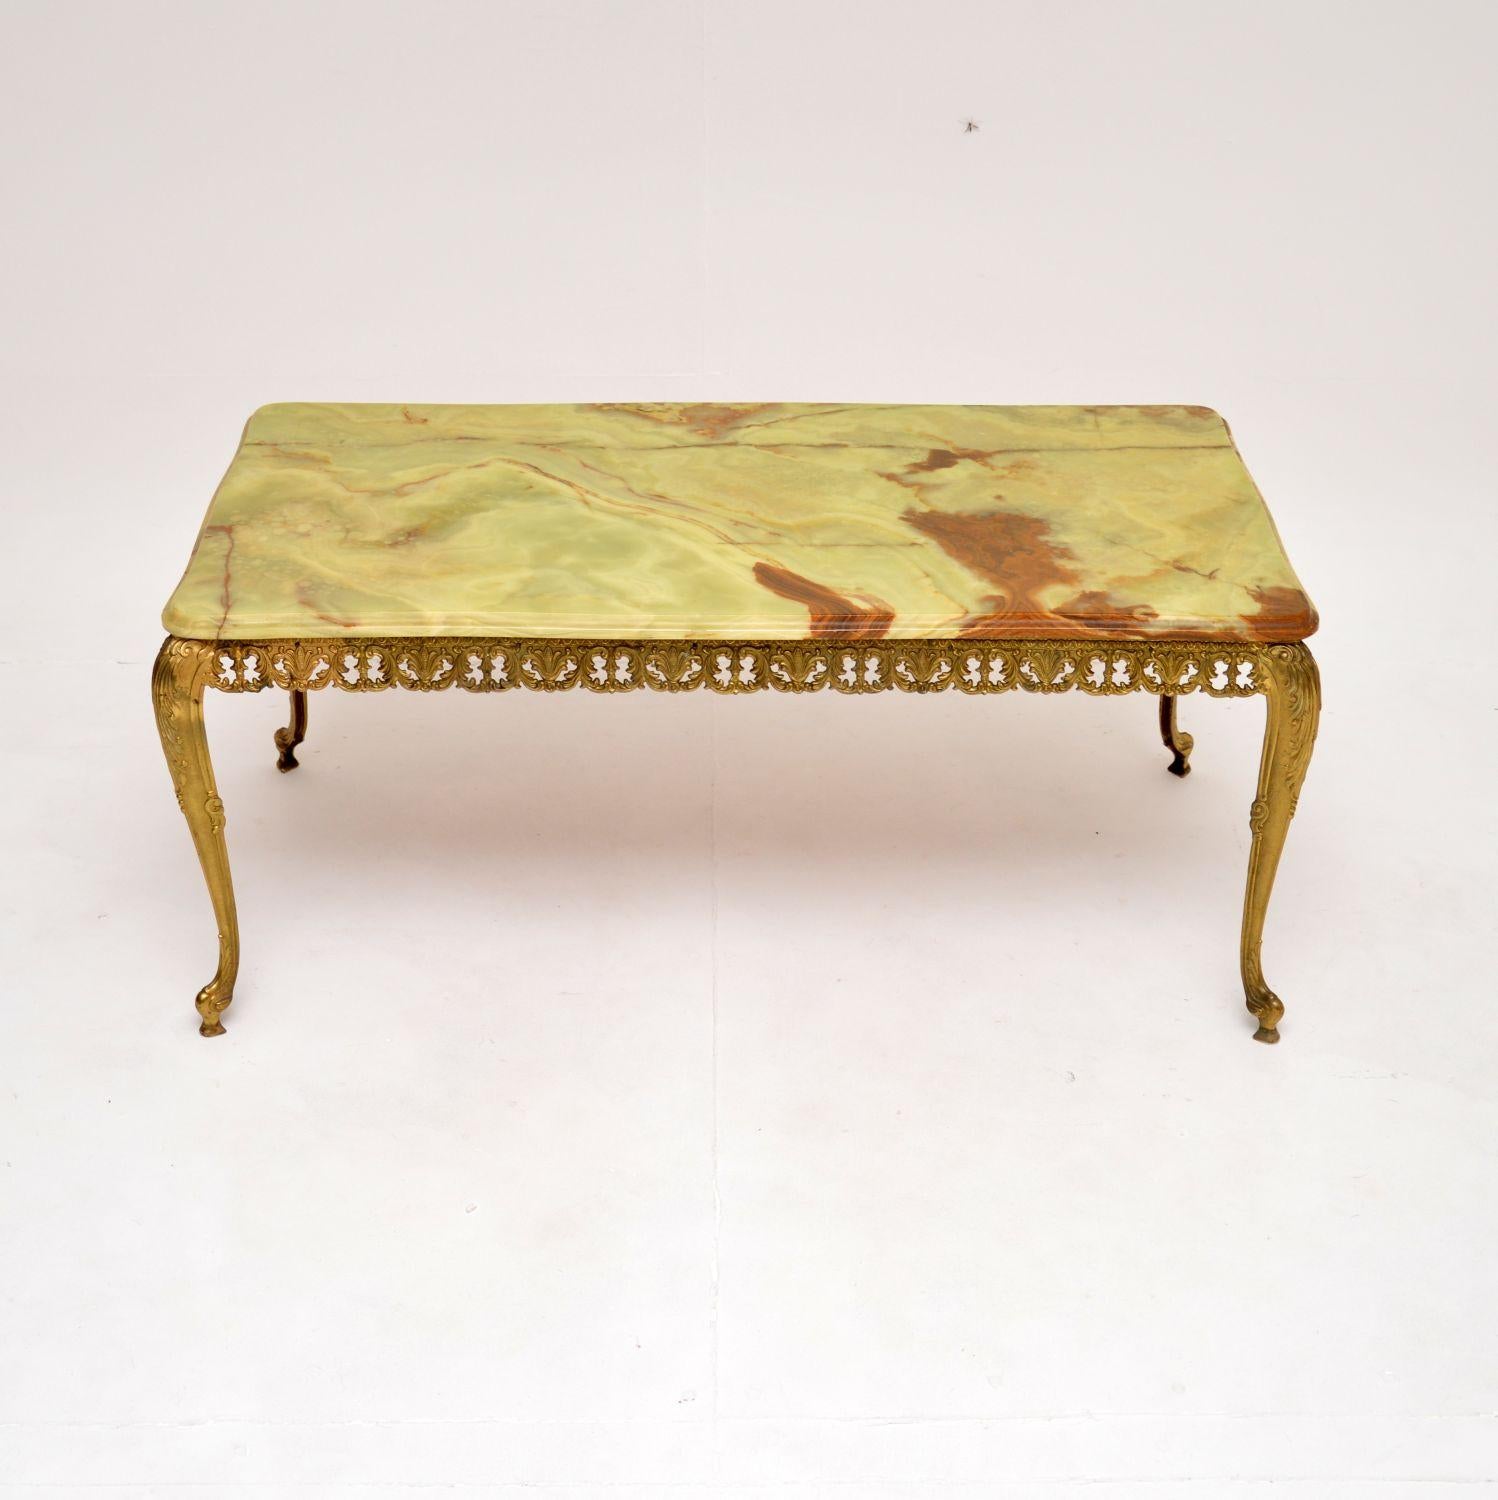 A beautiful and very well made antique French coffee table, dating from around the 1930’s.

It is of superb quality, the beautiful pierced brass frame has stunning details. This has an onyx top that sits on the base, the onyx has gorgeous colour